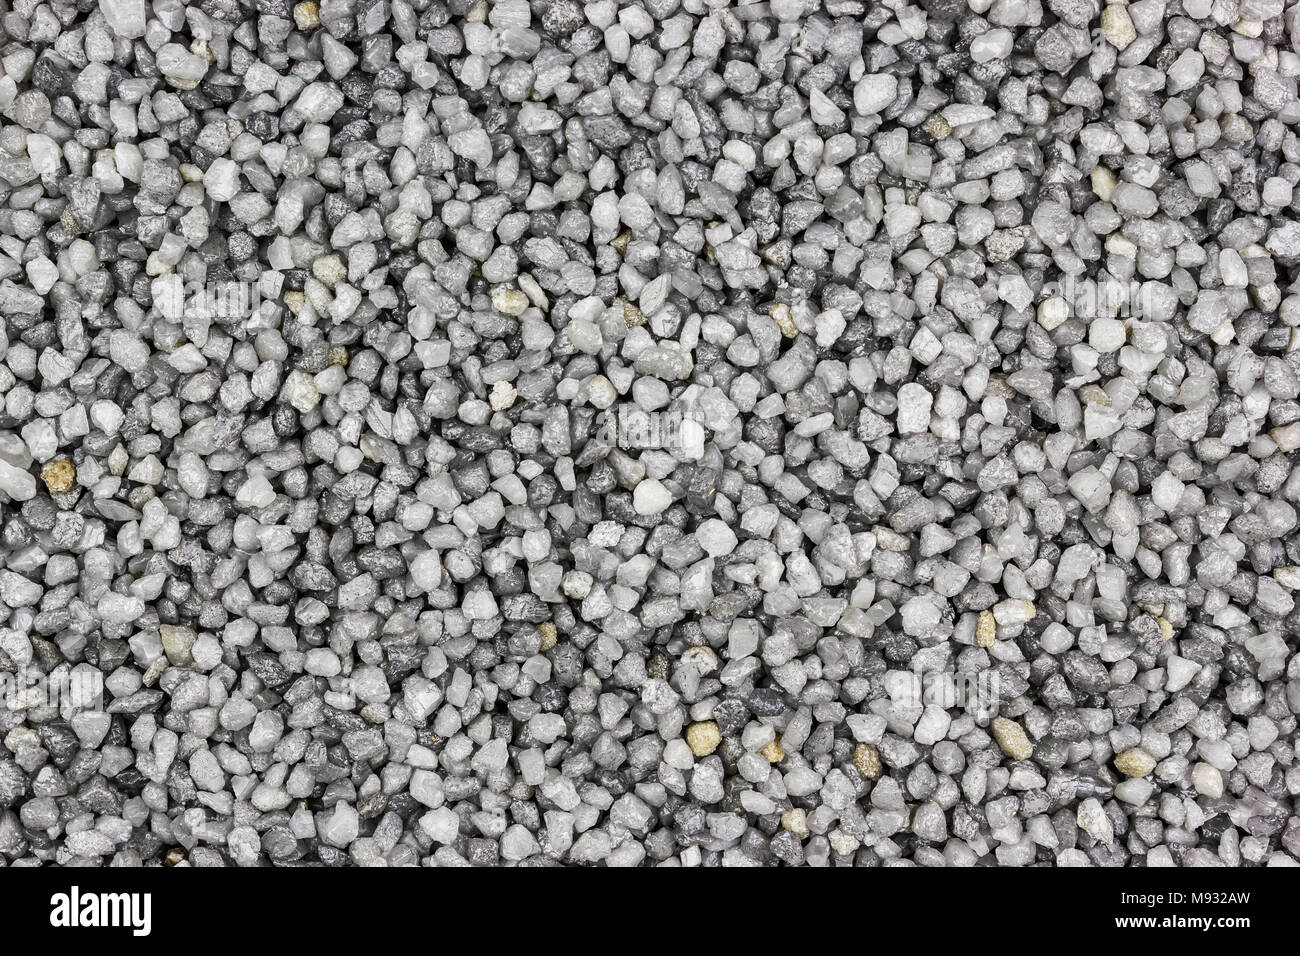 Grey fine gravel as background, place for text Stock Photo